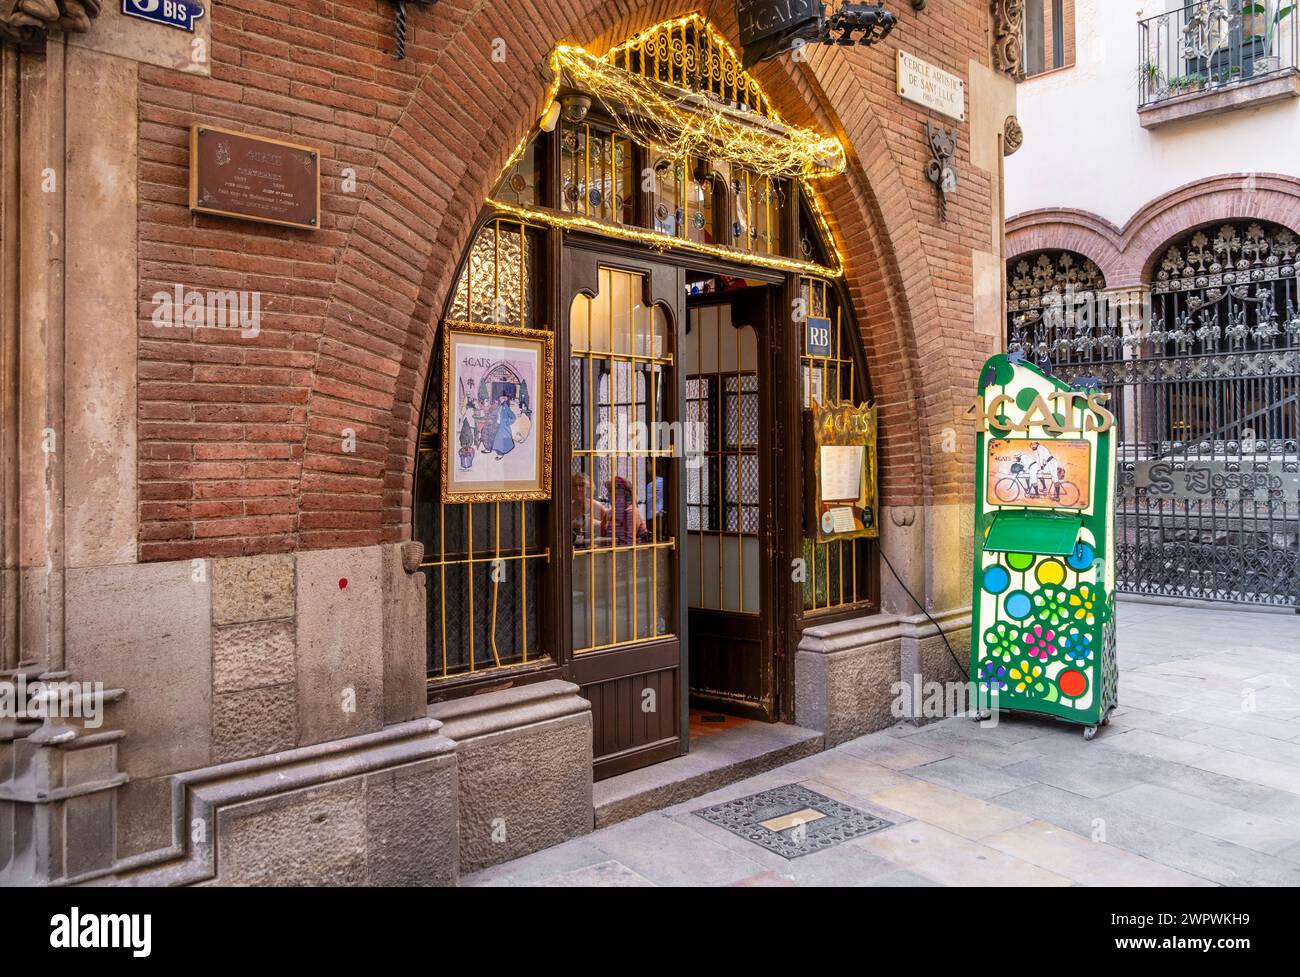 Main entrance of Quatre Gats or Four Cats cafe in Barcelona, a popular meeting place for famous artists throughout th Stock Photo